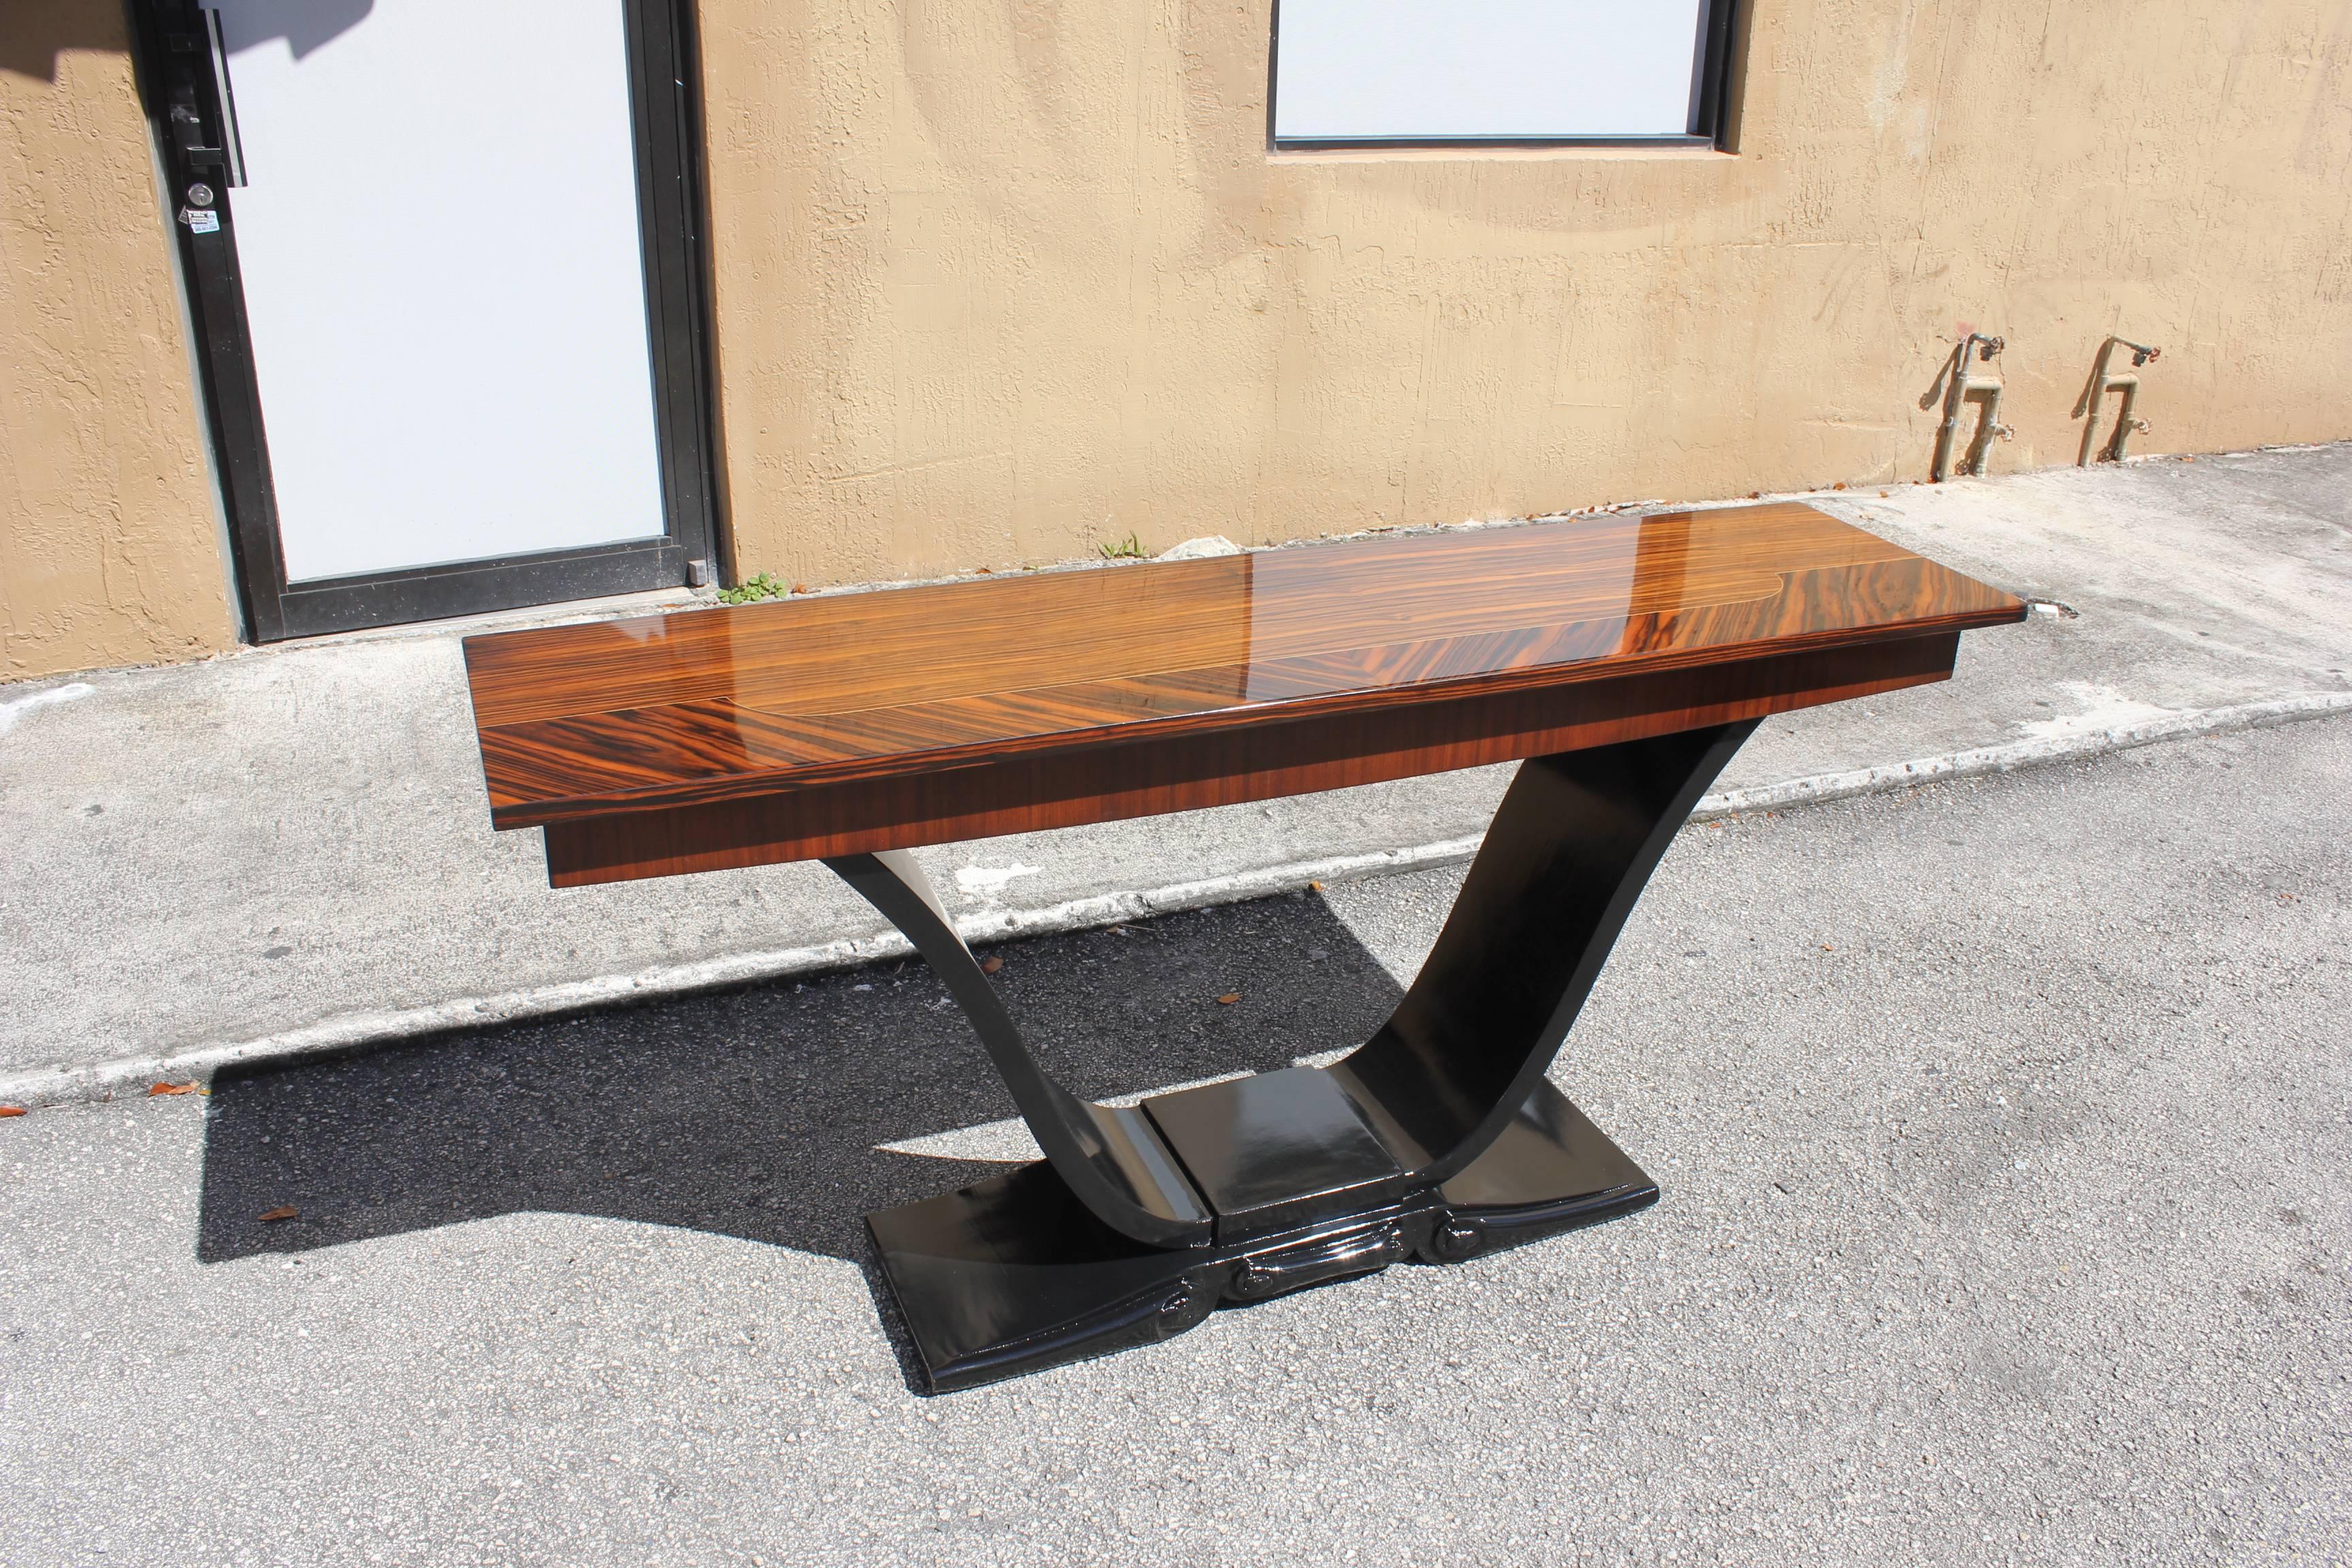 Spectacular pair of French Art Deco exotic Macassar ebony console tables, circa 1940s. Beautiful multi color Macassar ebony with black lacquer U-base, high gloss lacquer finish in both side, from France, Paris.